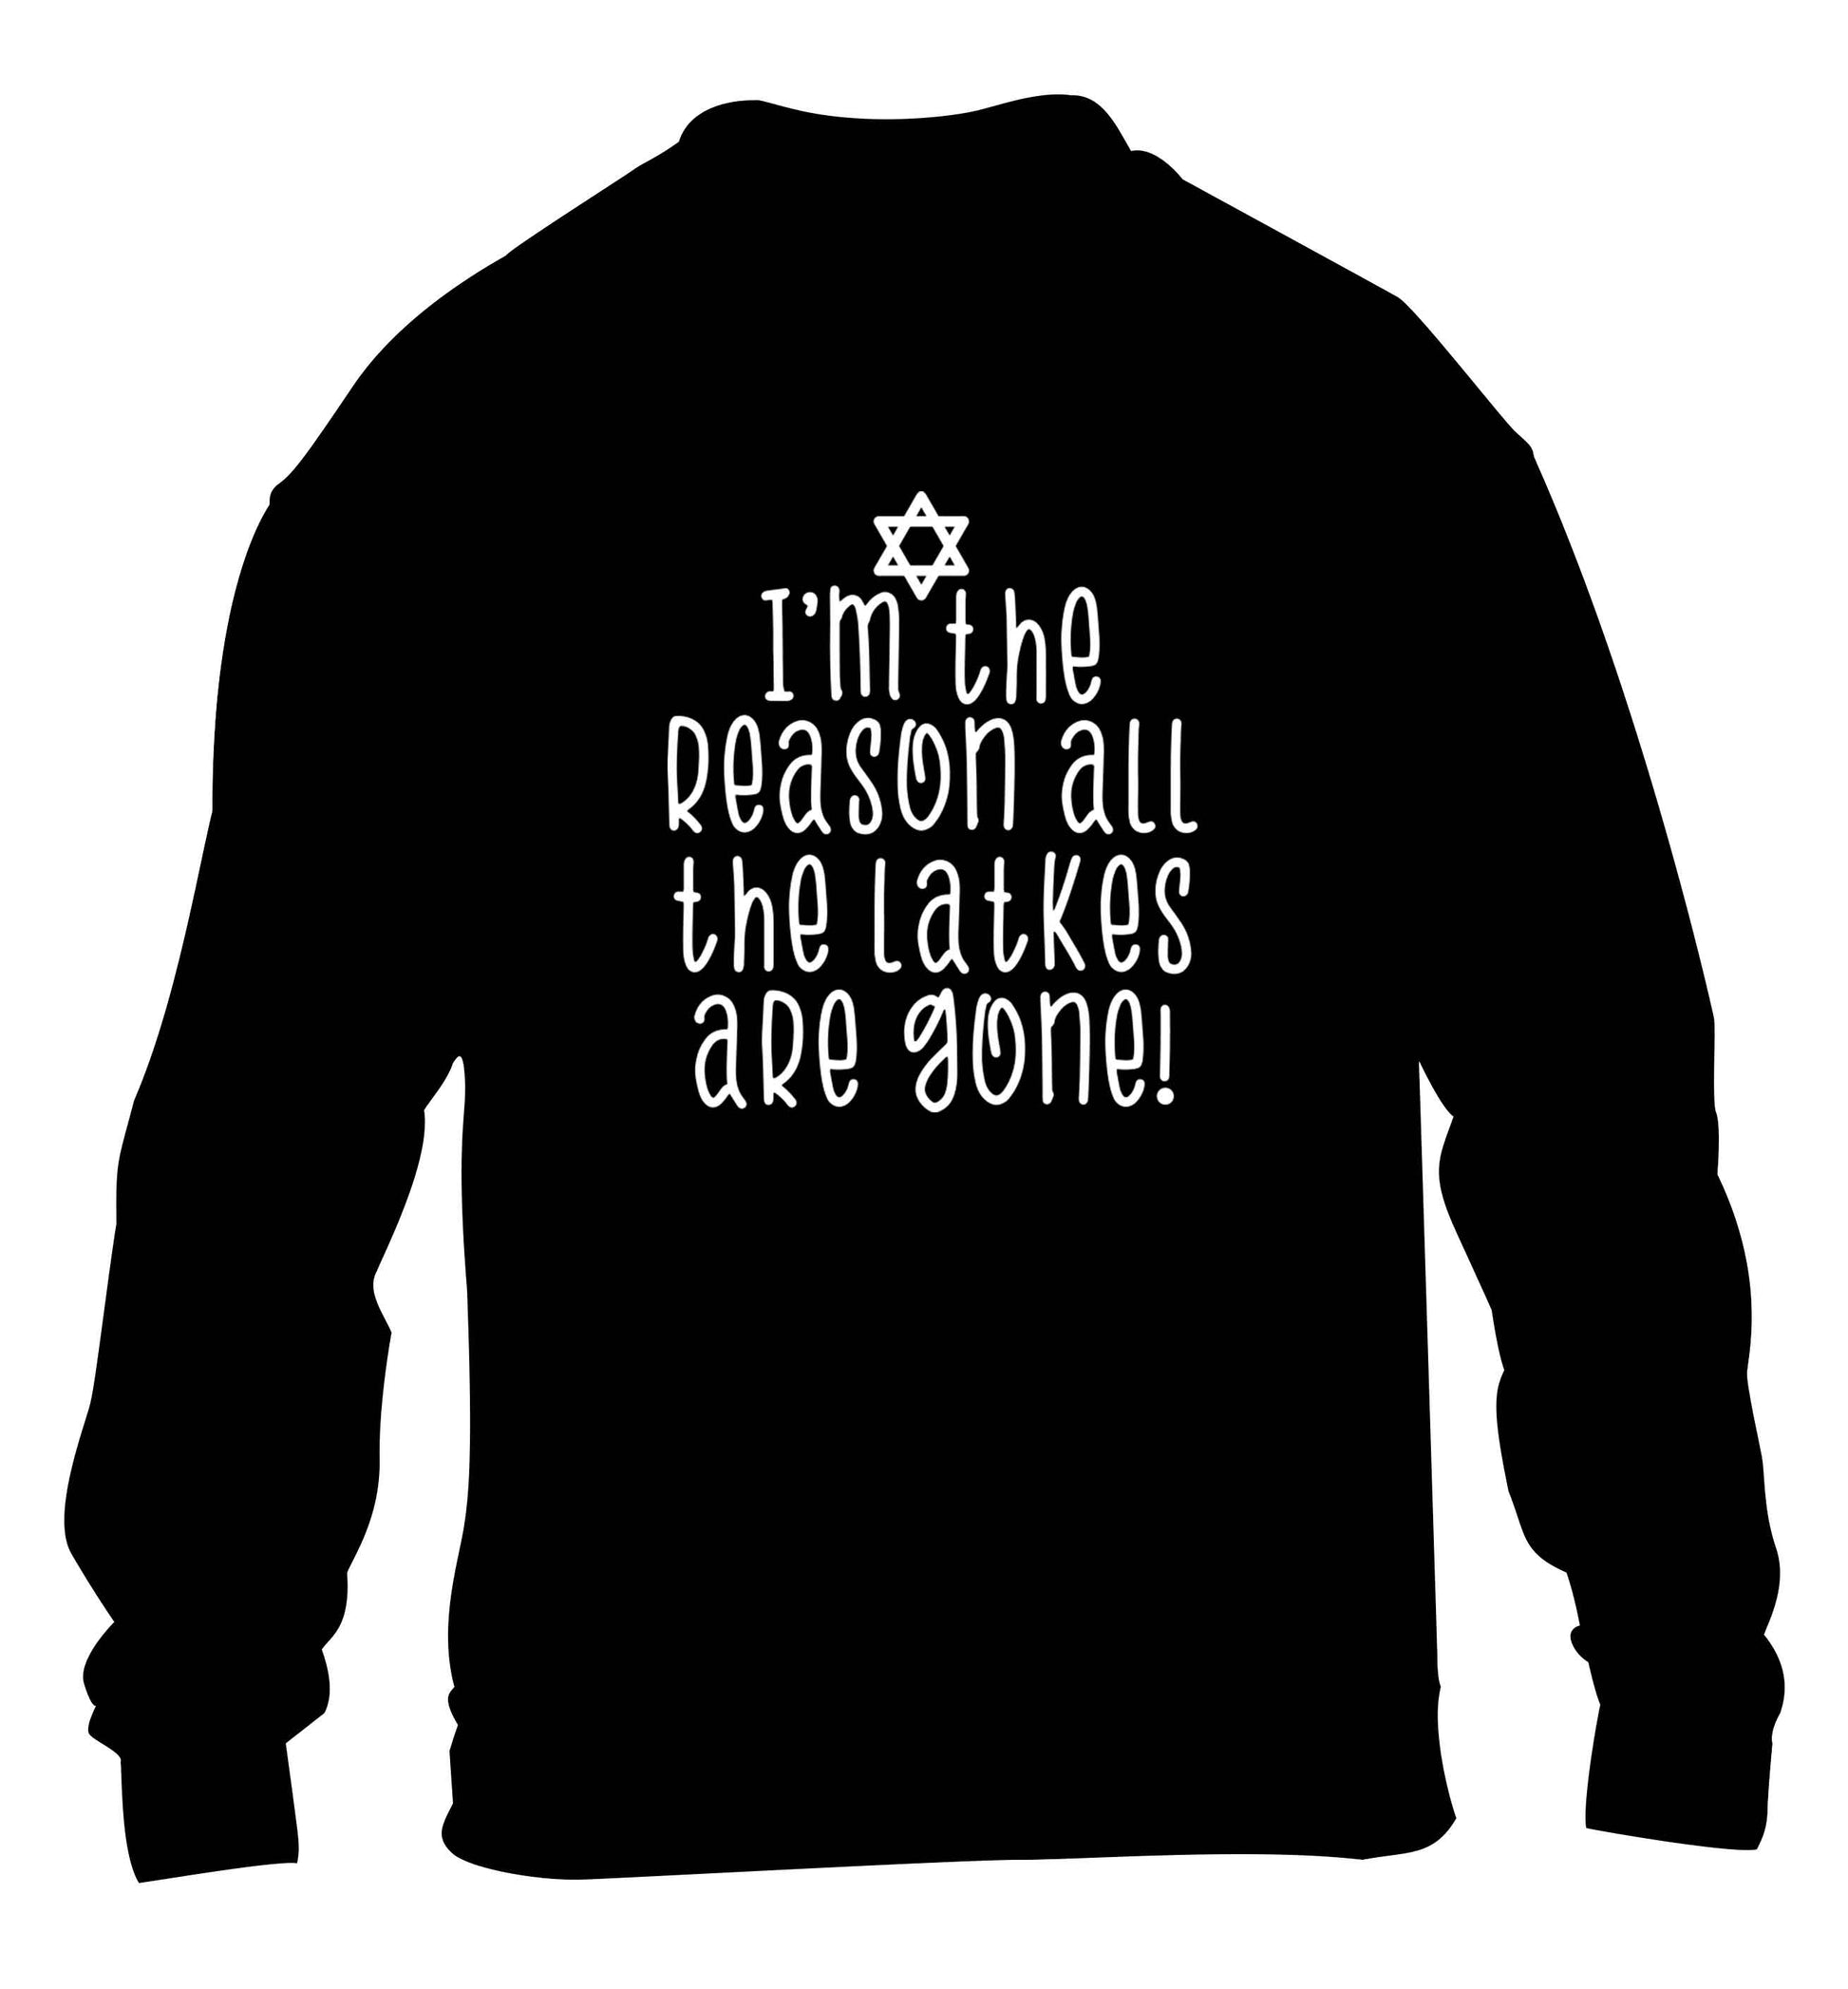 I'm the reason all the latkes are gone children's black sweater 12-13 Years